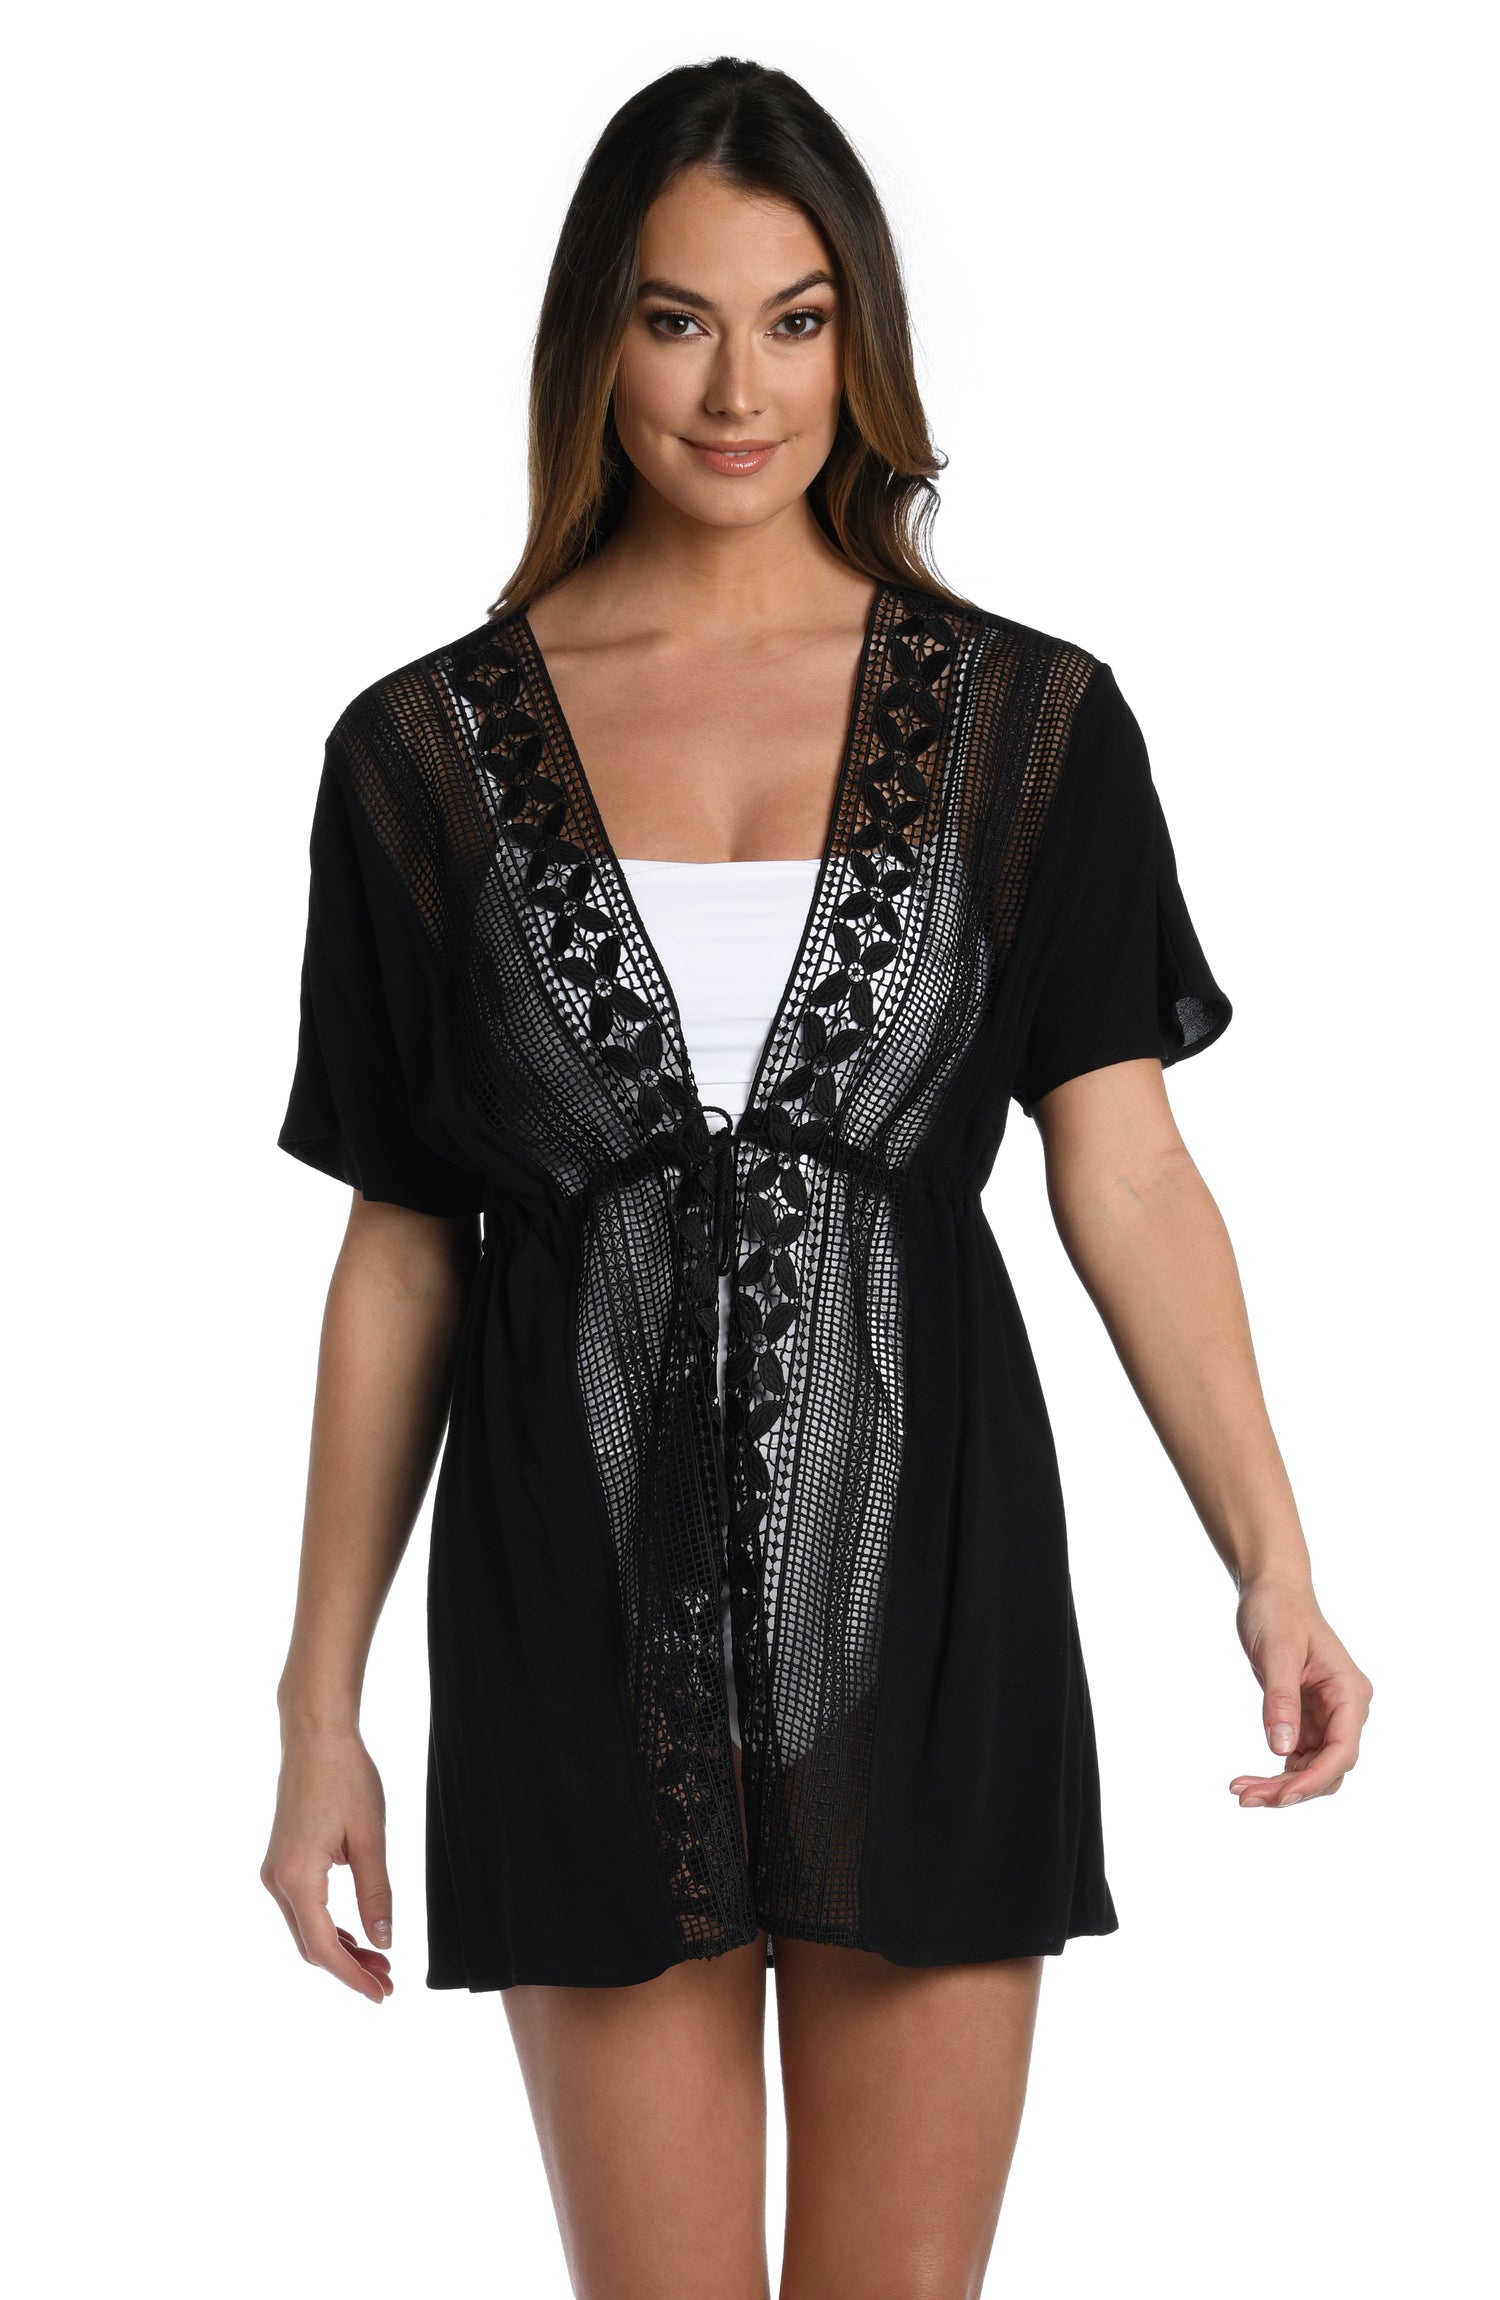 Model is wearing a crochet detailed pattern on this black kimono cover up from out Coastal Covers collection!